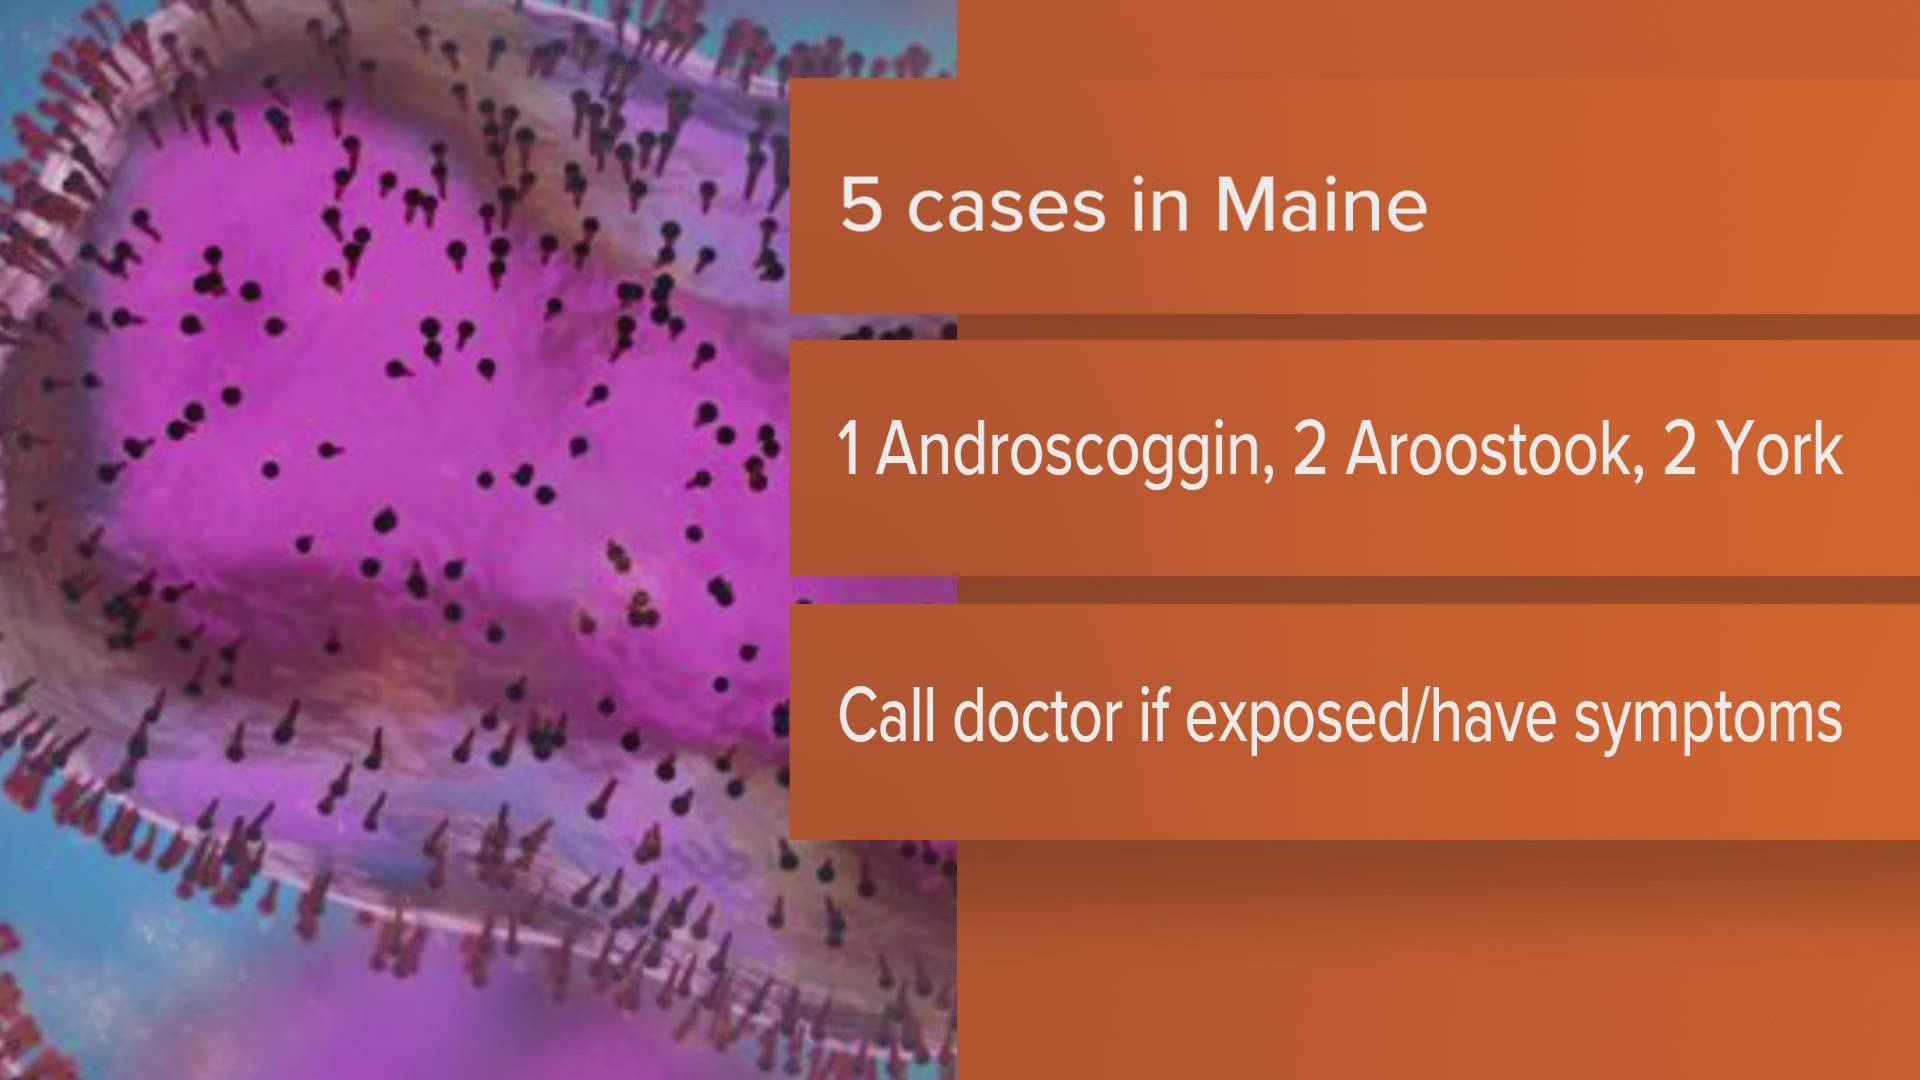 Two cases have been reported in York County, two in Aroostook County, and one in Androscoggin County.